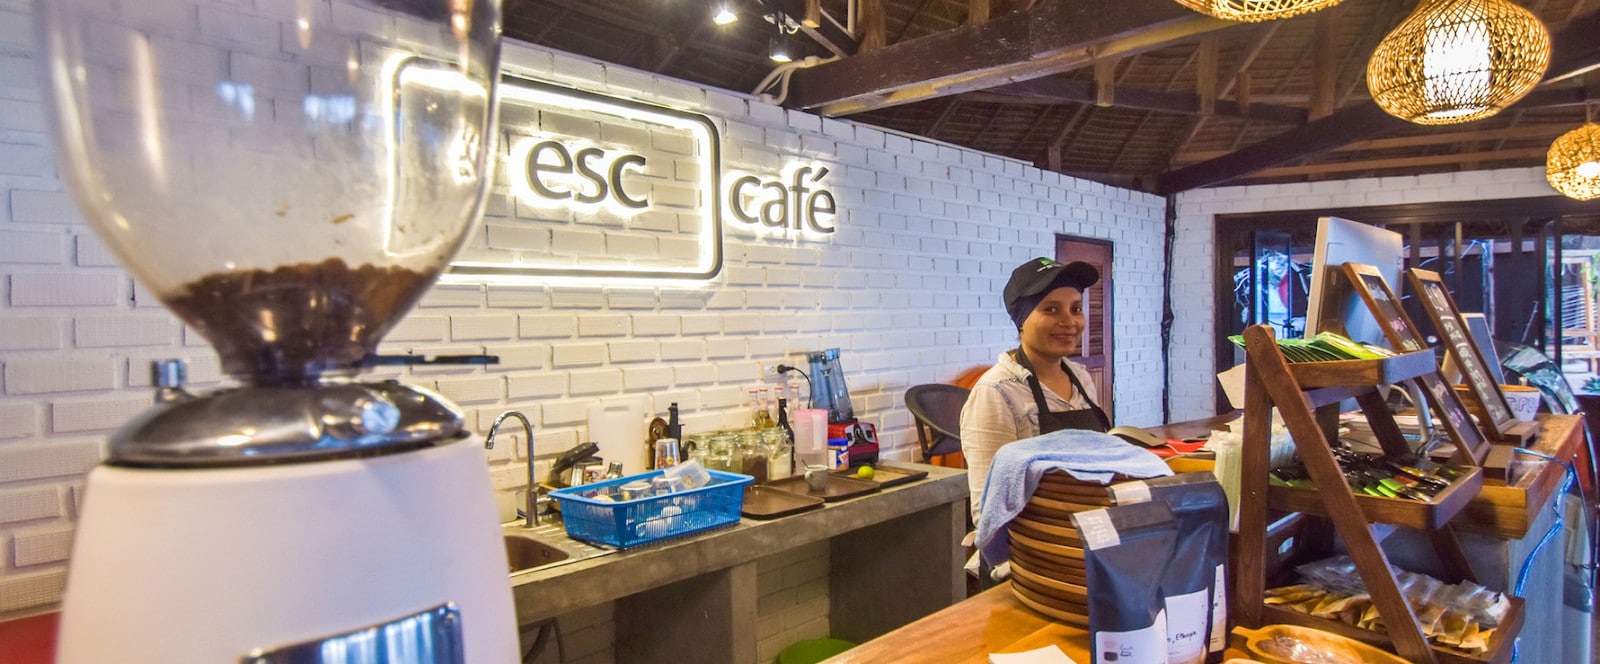 Hot coffee brewing at Escape Cafe